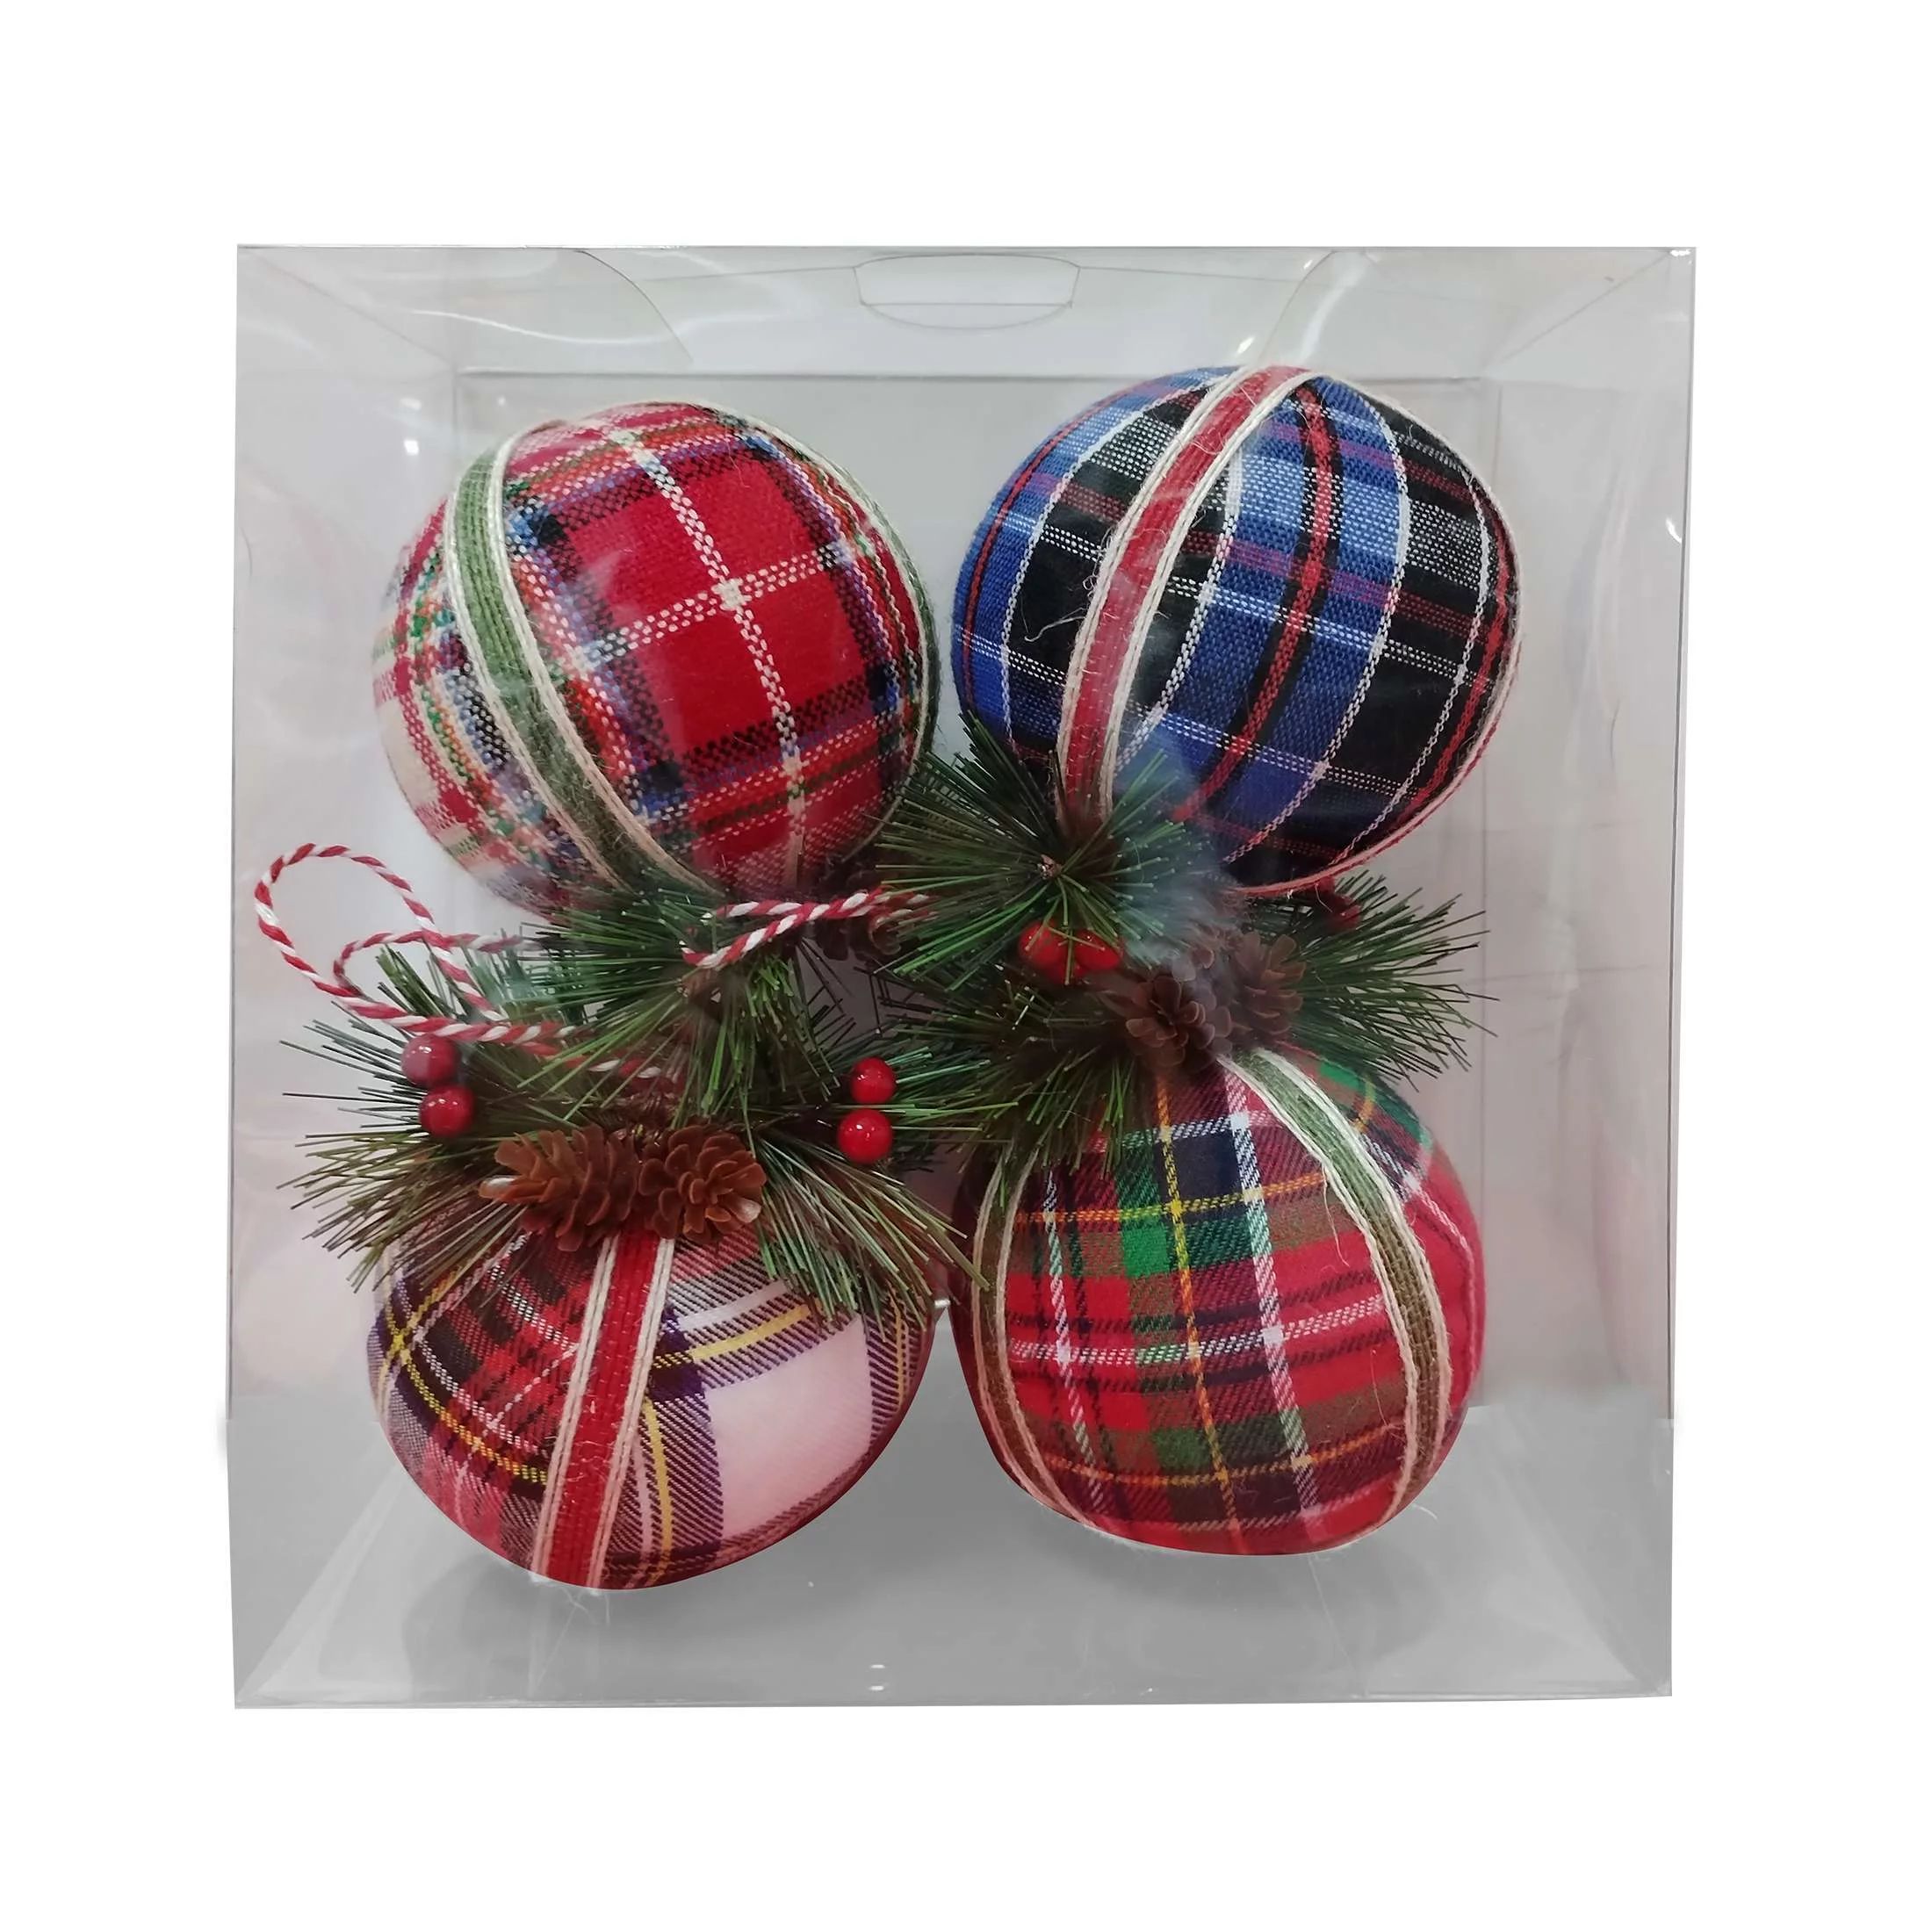 Plaid Fabric Ball Christmas Ornaments, 4 Pieces, 0.2lbs, by Holiday Time | Walmart (US)